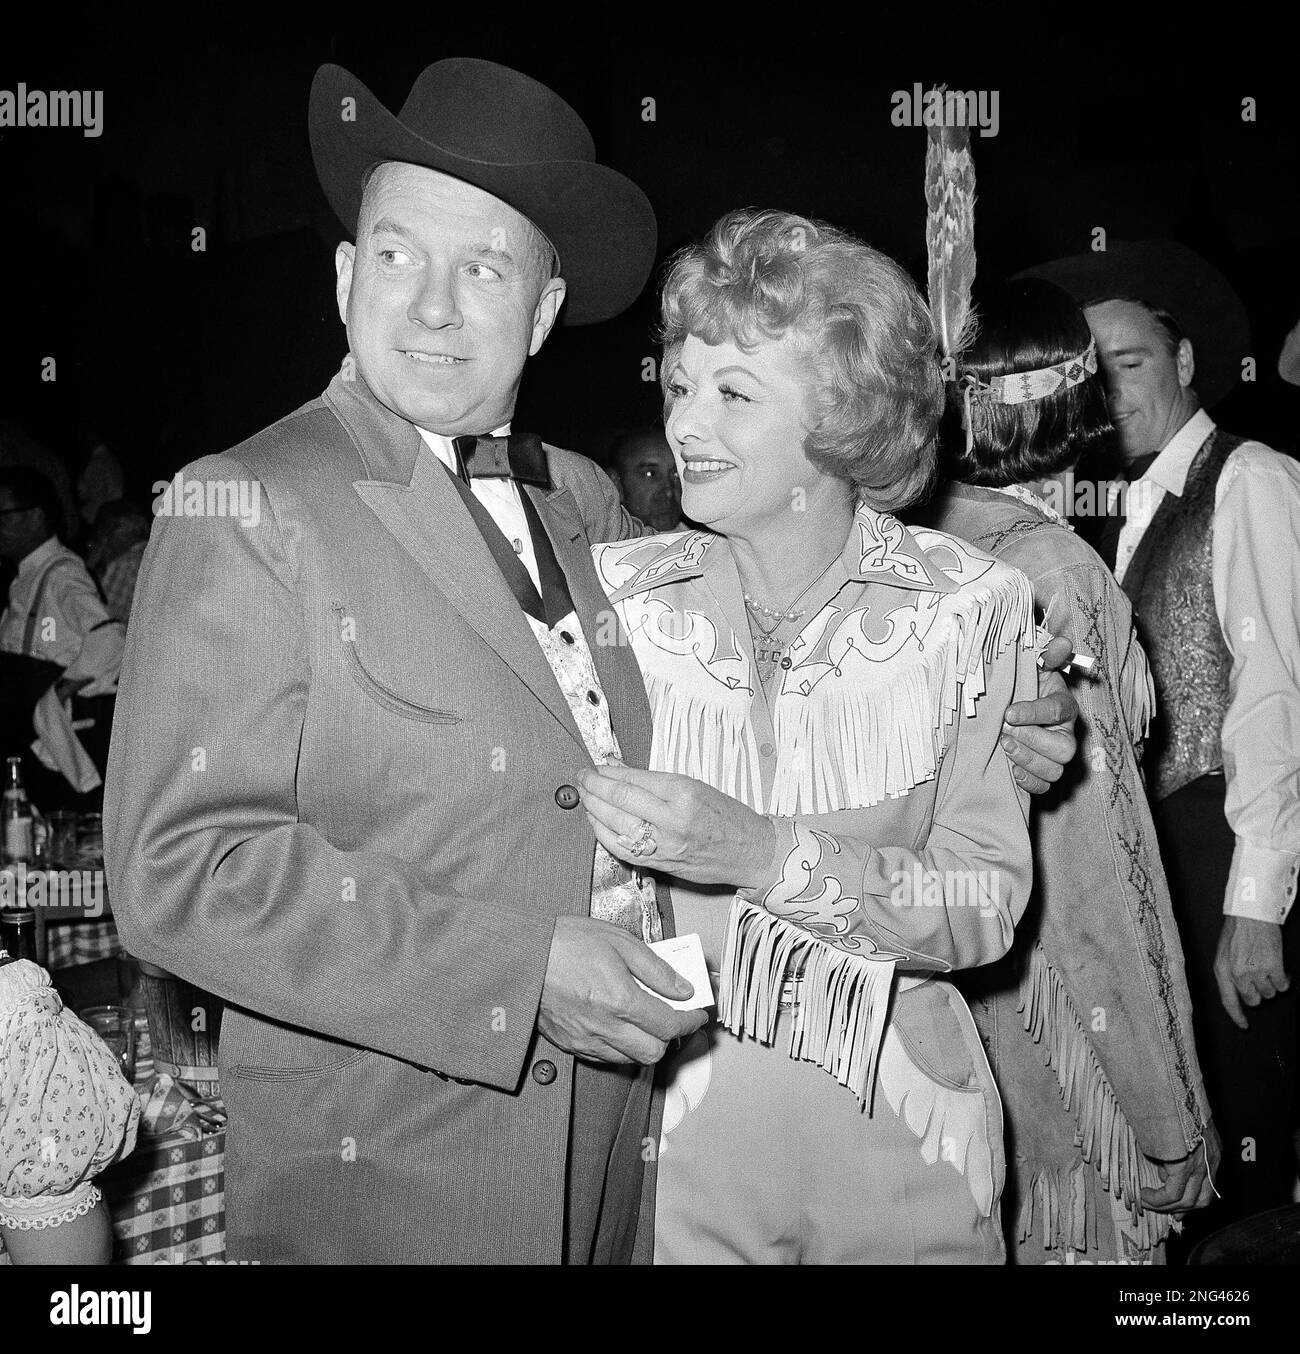 Lucille Ball, who recently divorced Desi Arnaz, attends the annual SHARE  charity party withn composer Jimmy Van Heusen in Hollwood, Calif. on May  13, 1960. The organization is composed of wives of